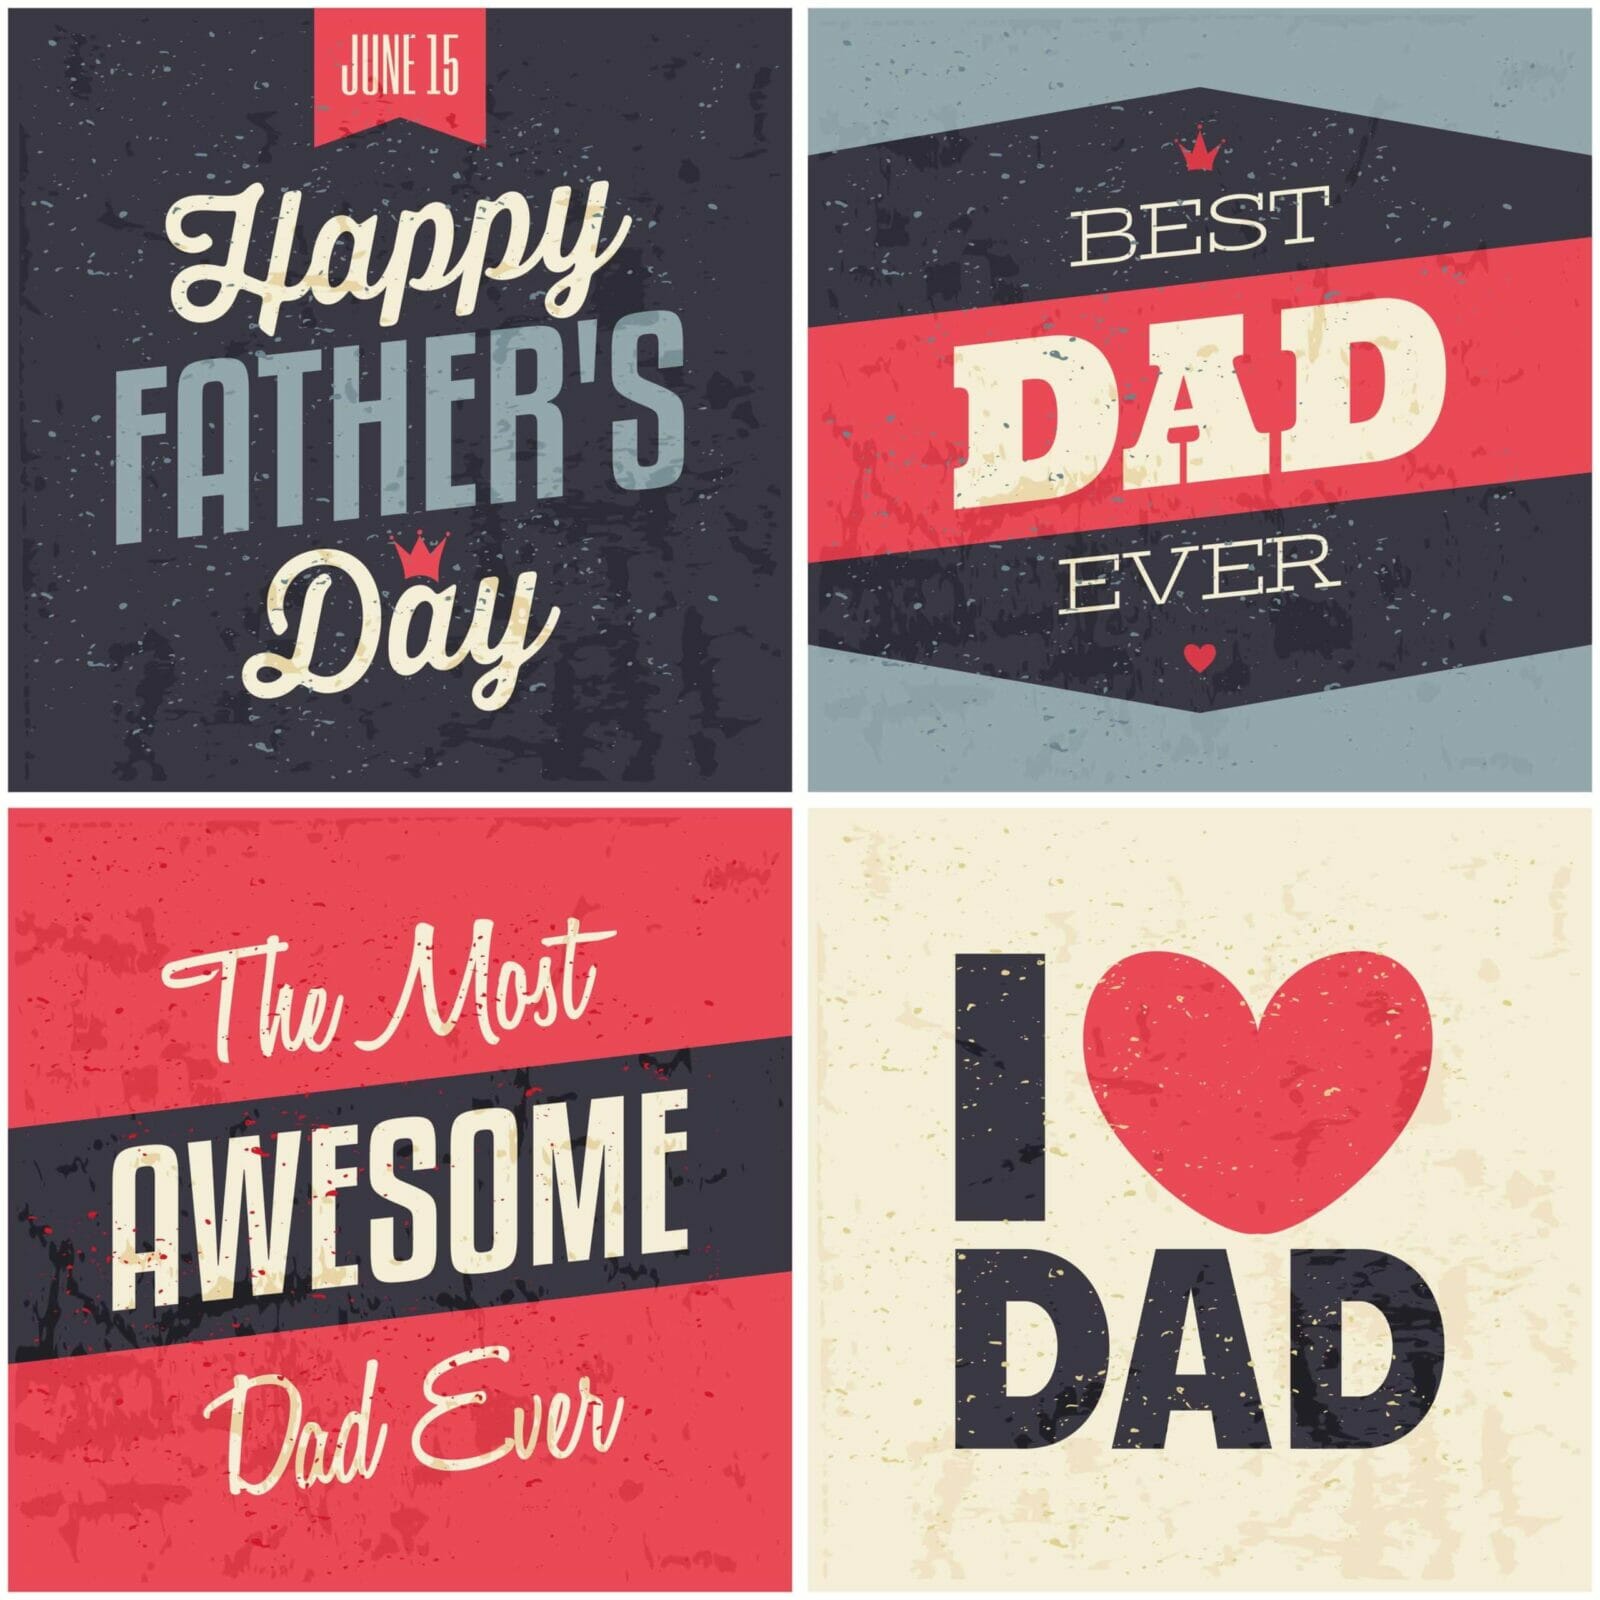 A selection of unique Father's Day cards for those seeking last-minute gifts.